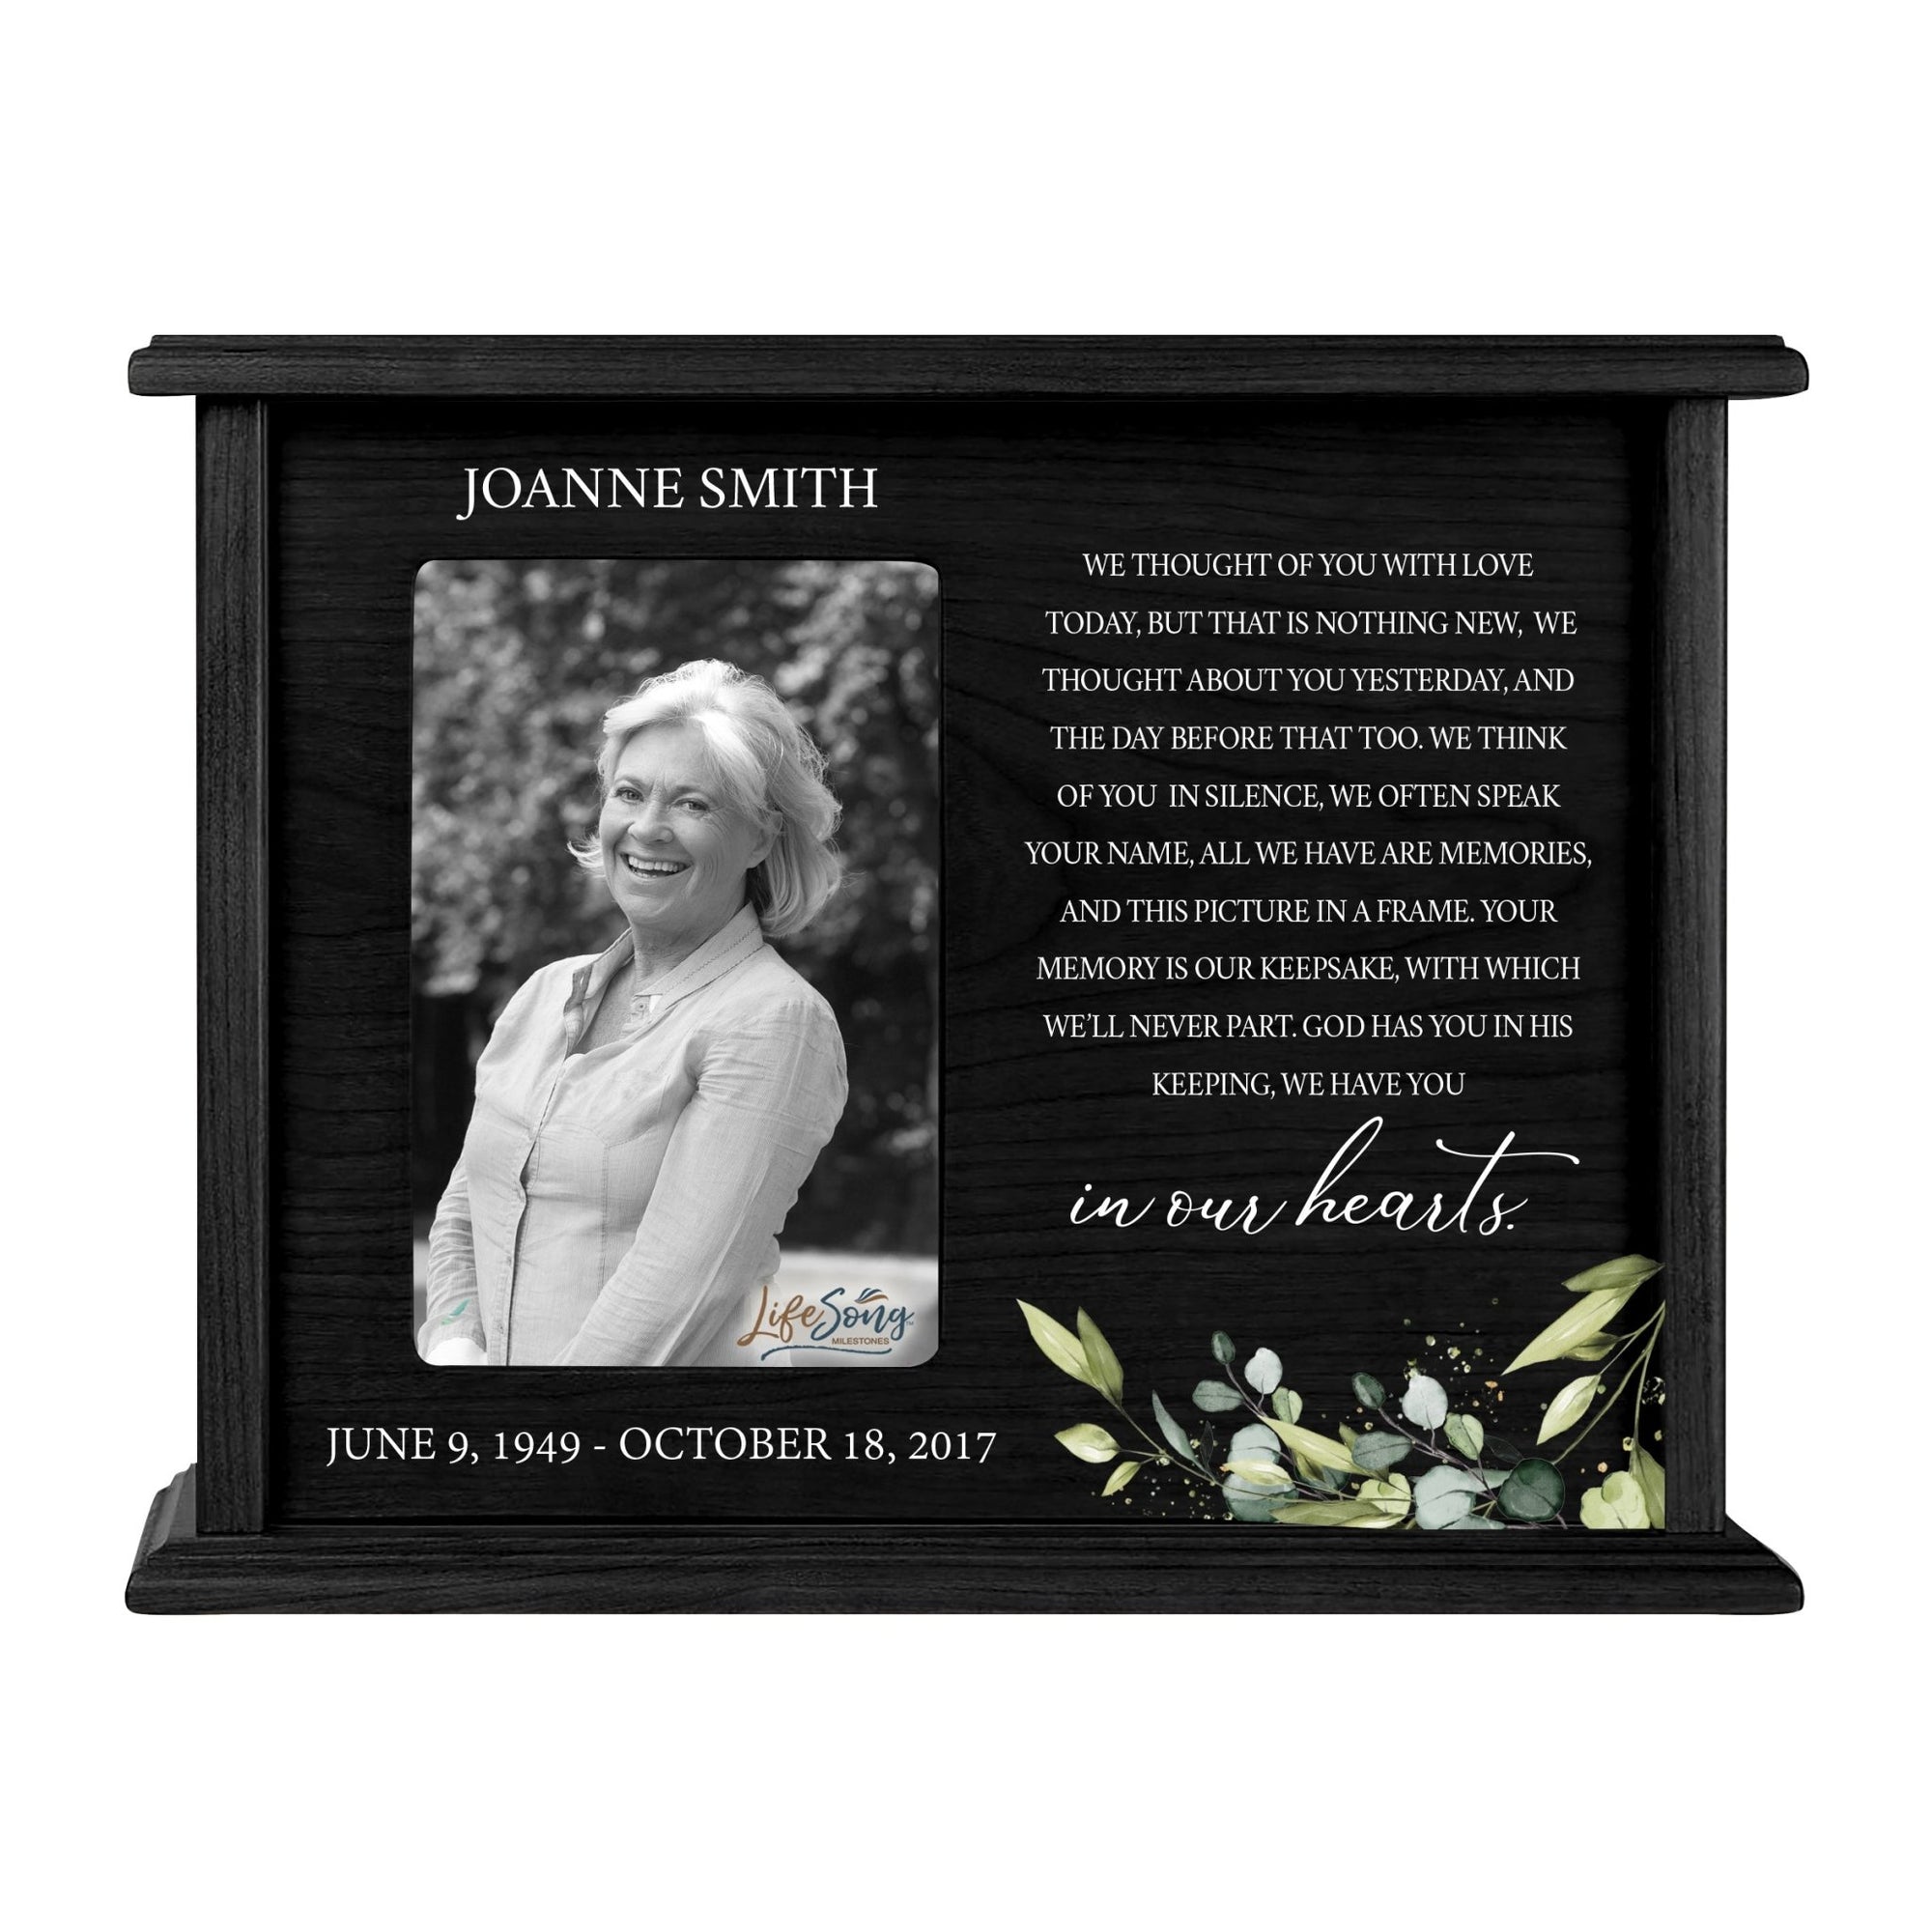 Personalized Memorial Photo Cremation Urn Box for Human Ashes - We Thought Of You - LifeSong Milestones